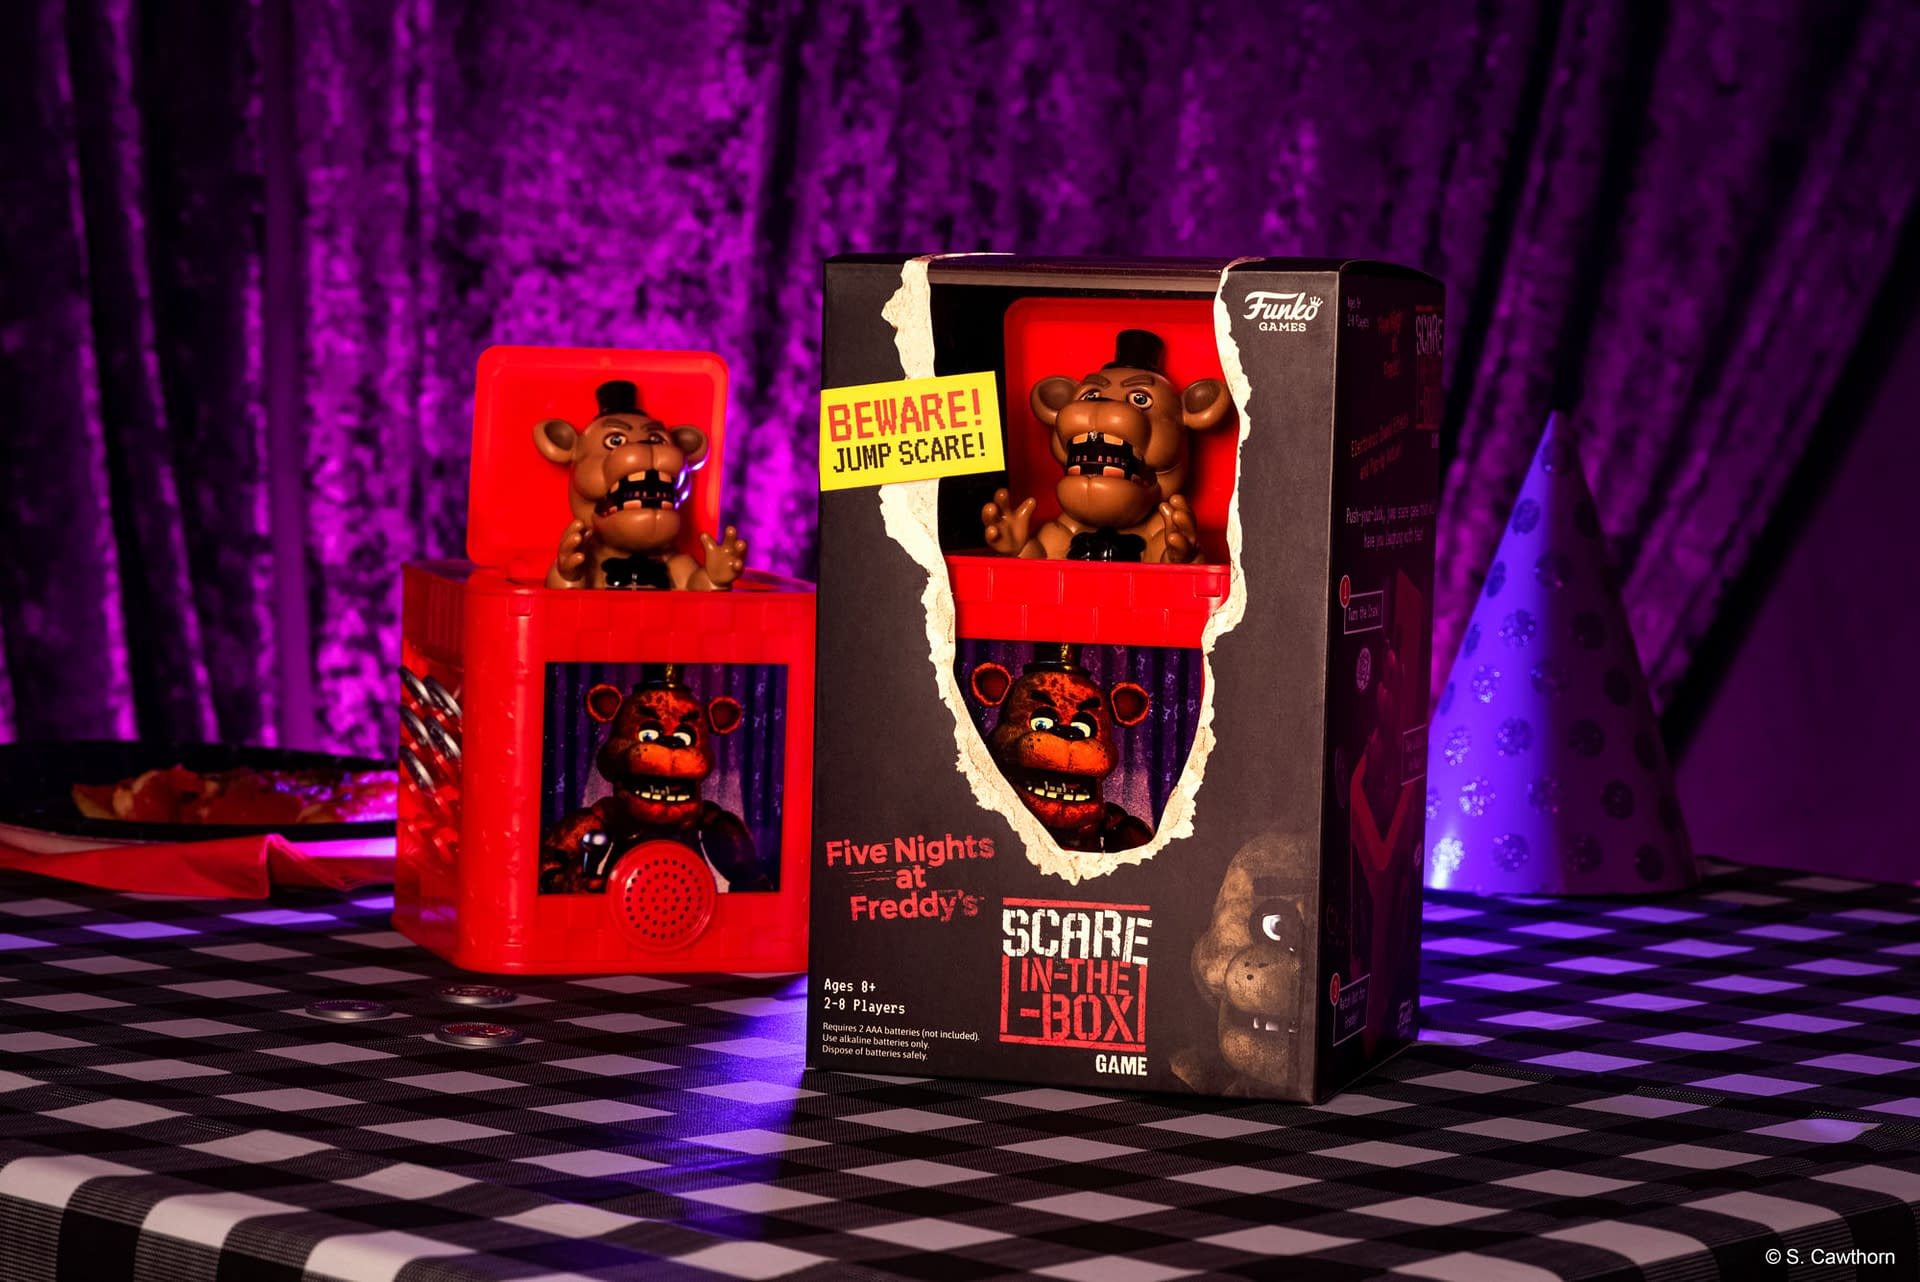 Top Action games tagged Five Nights at Freddy's 